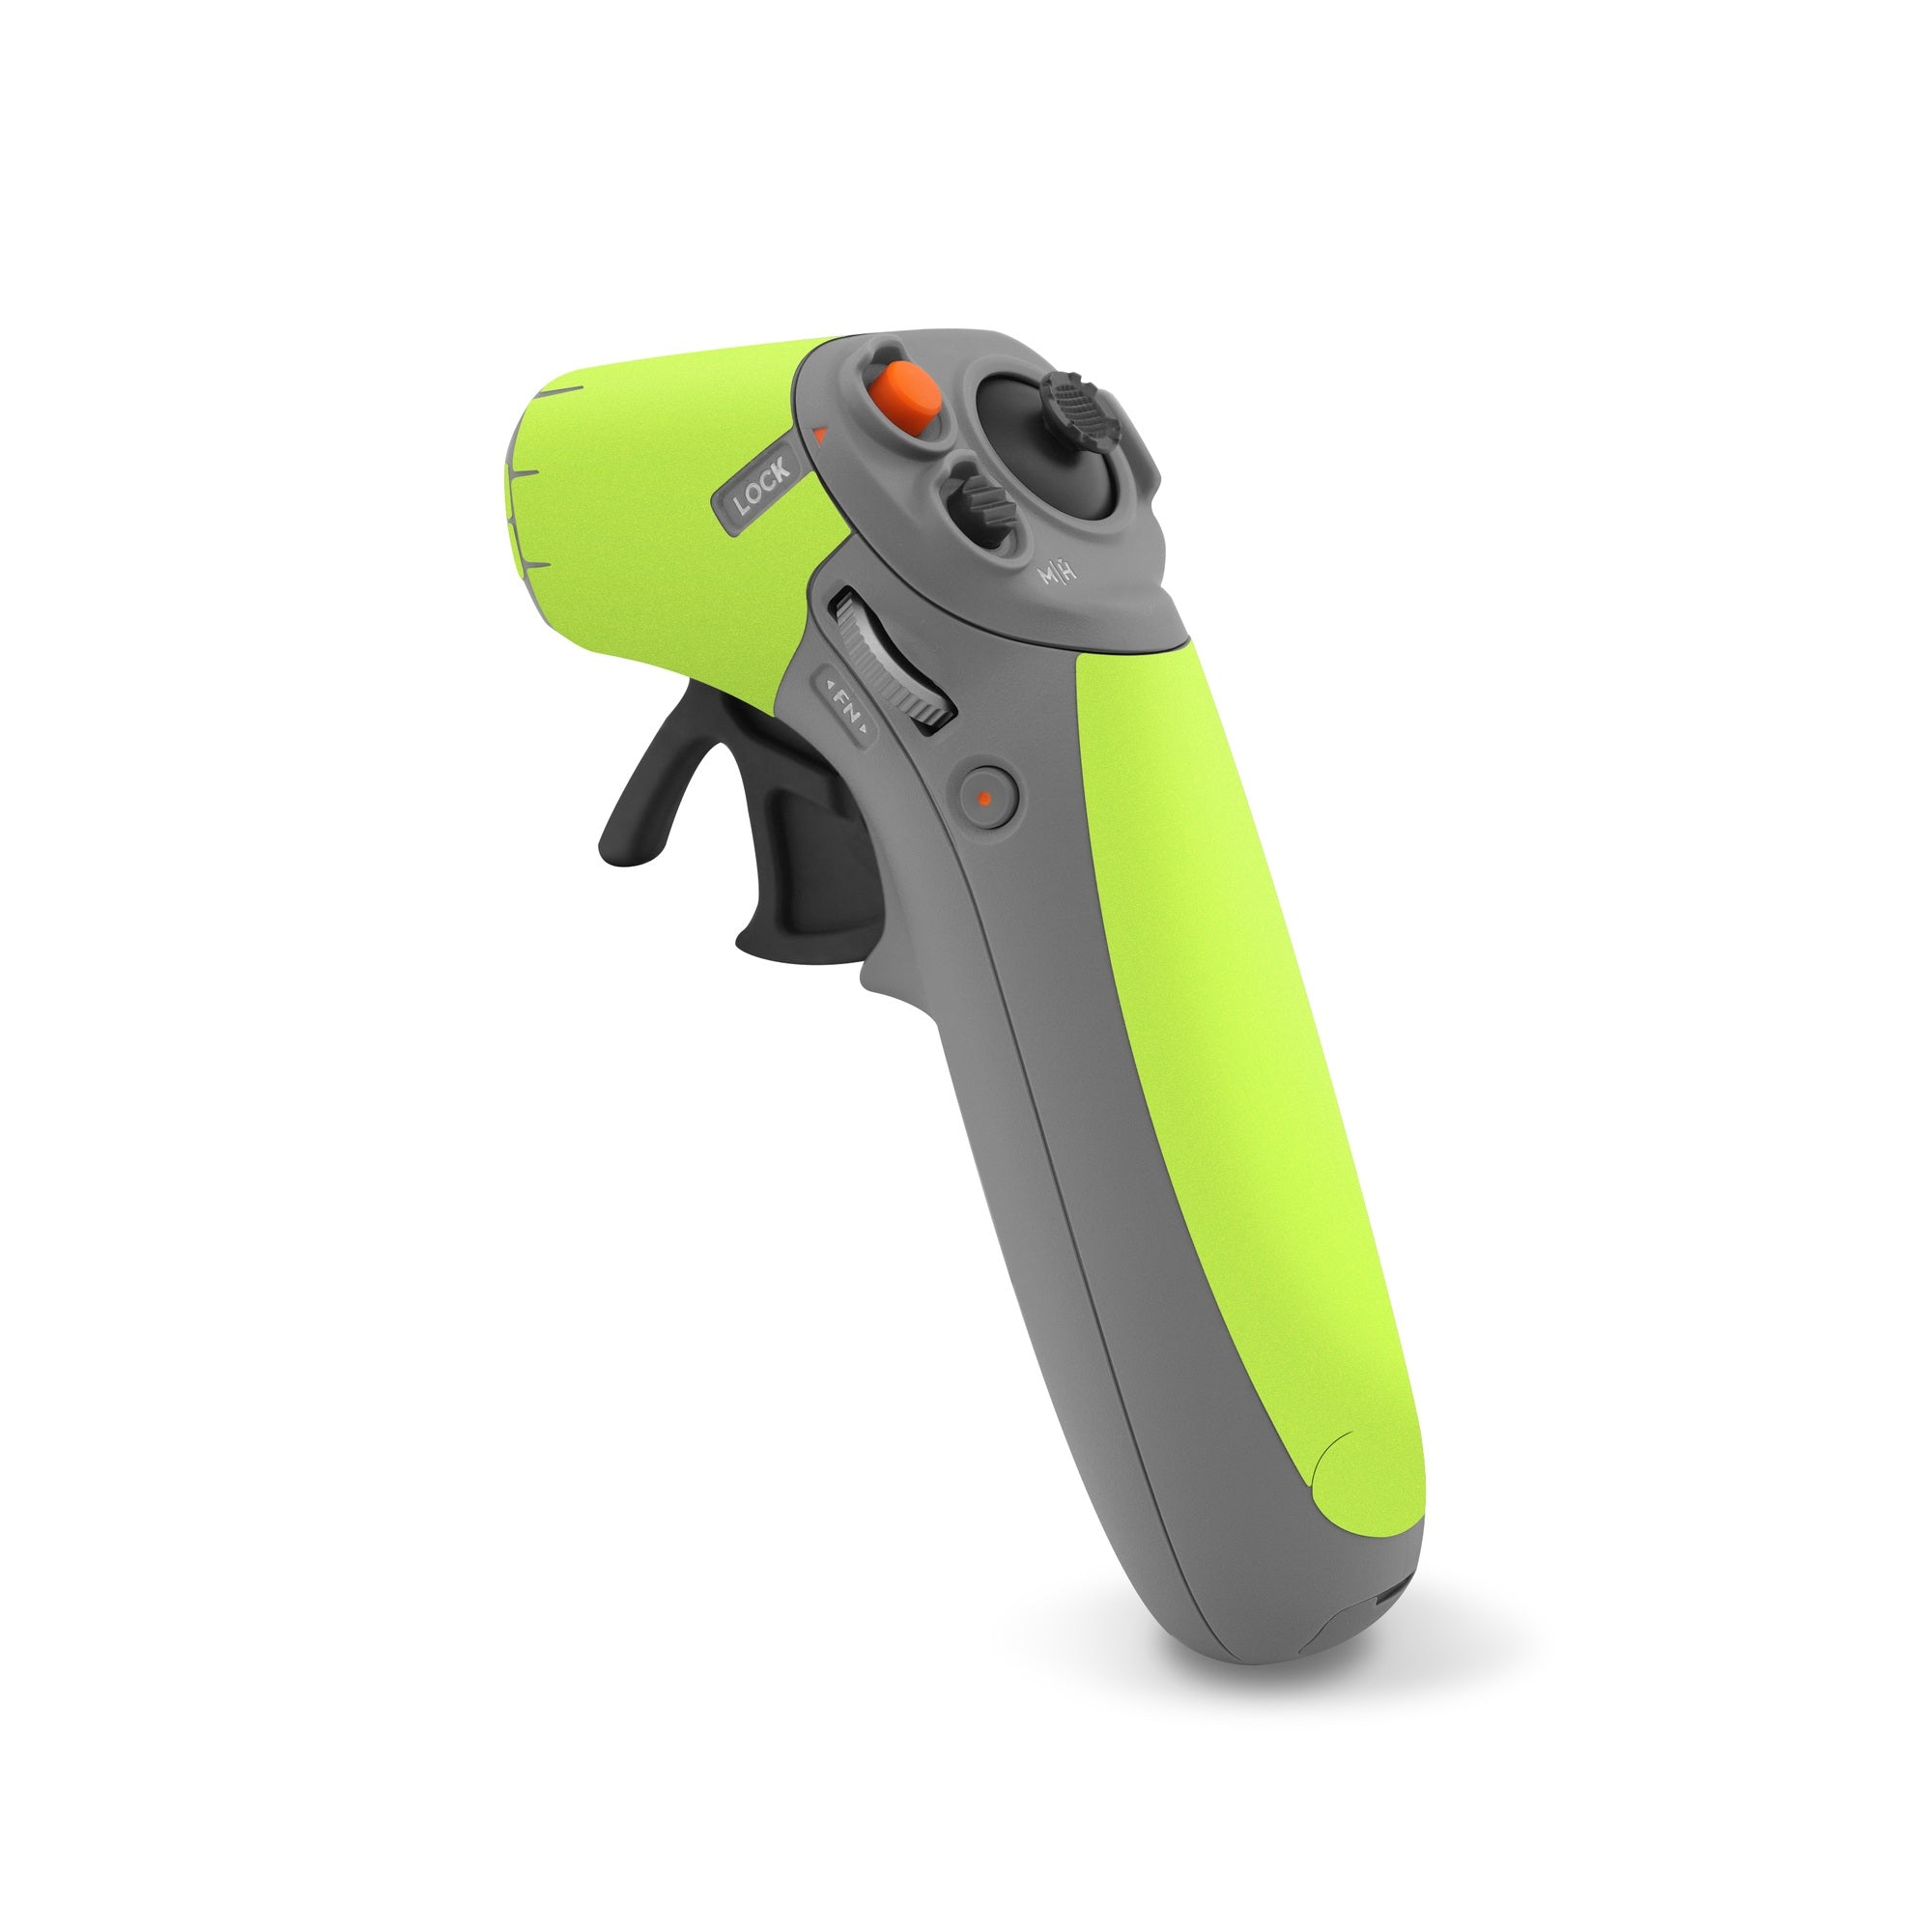 Solid State Lime - DJI Motion Controller 2 Skin